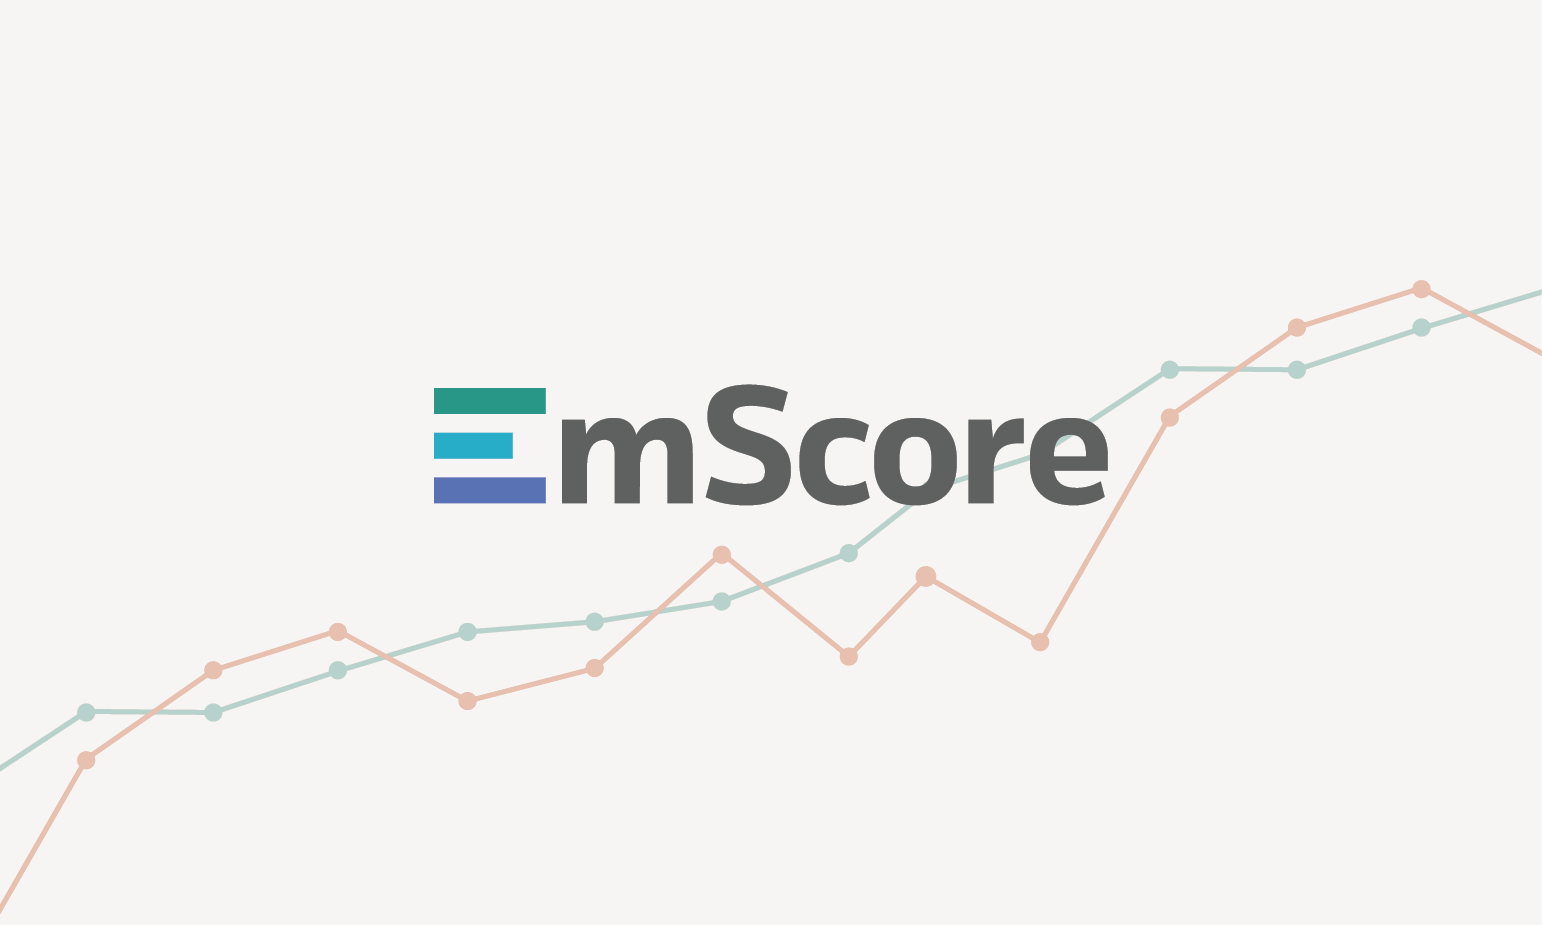 EmScore is a SaaS-based performance assessment system.